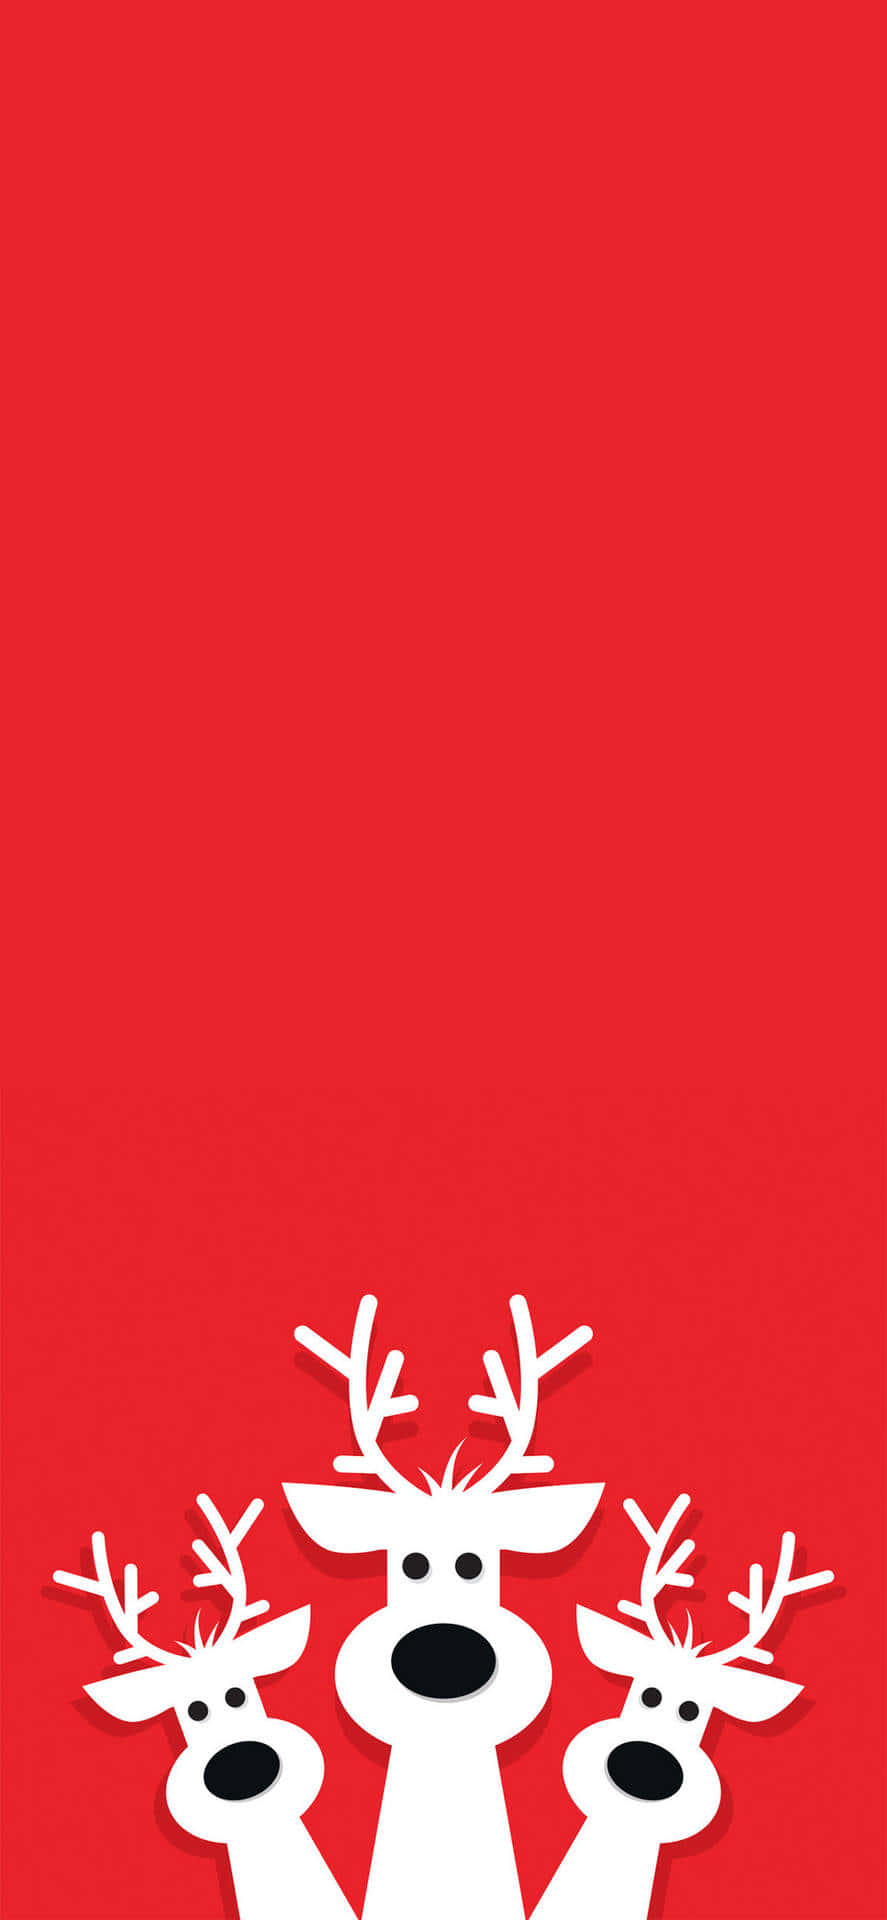 Christmas Reindeer On Red Background Wallpaper